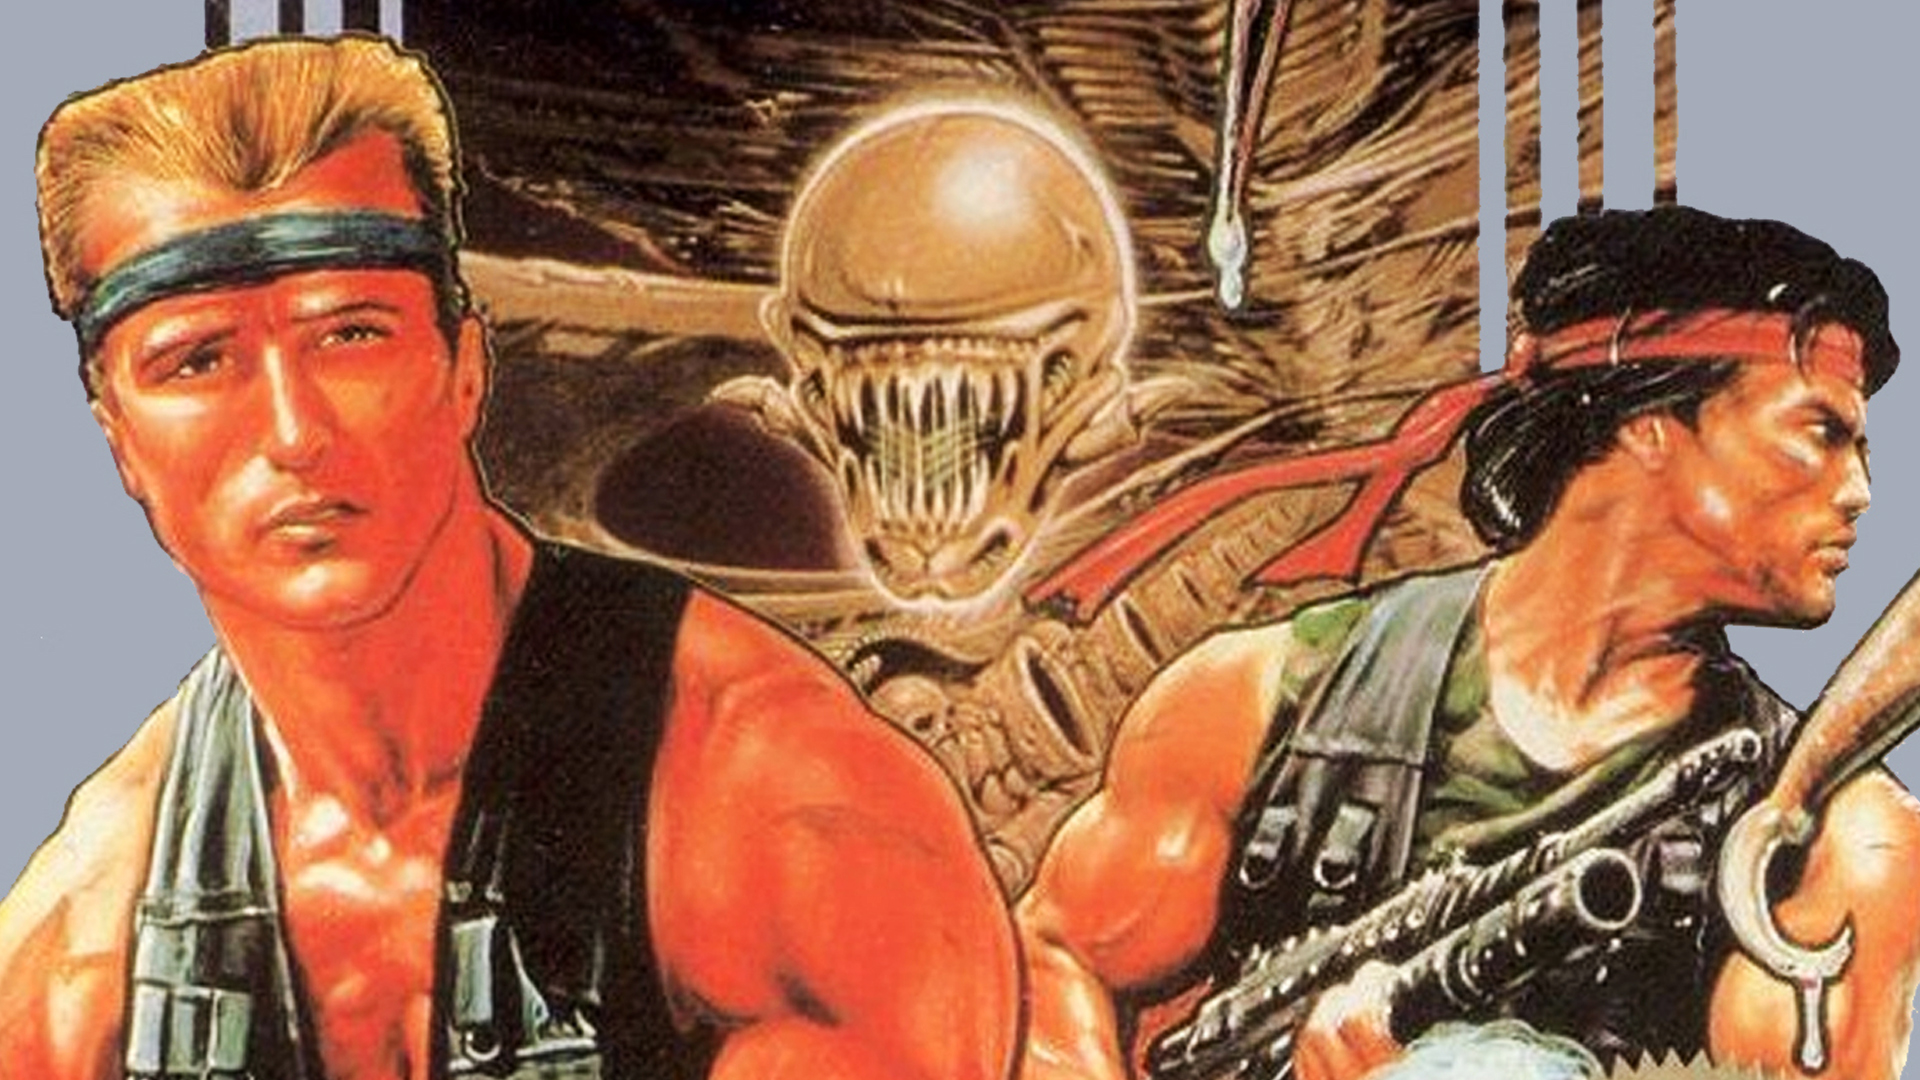 The art of the box for Contra on the NES